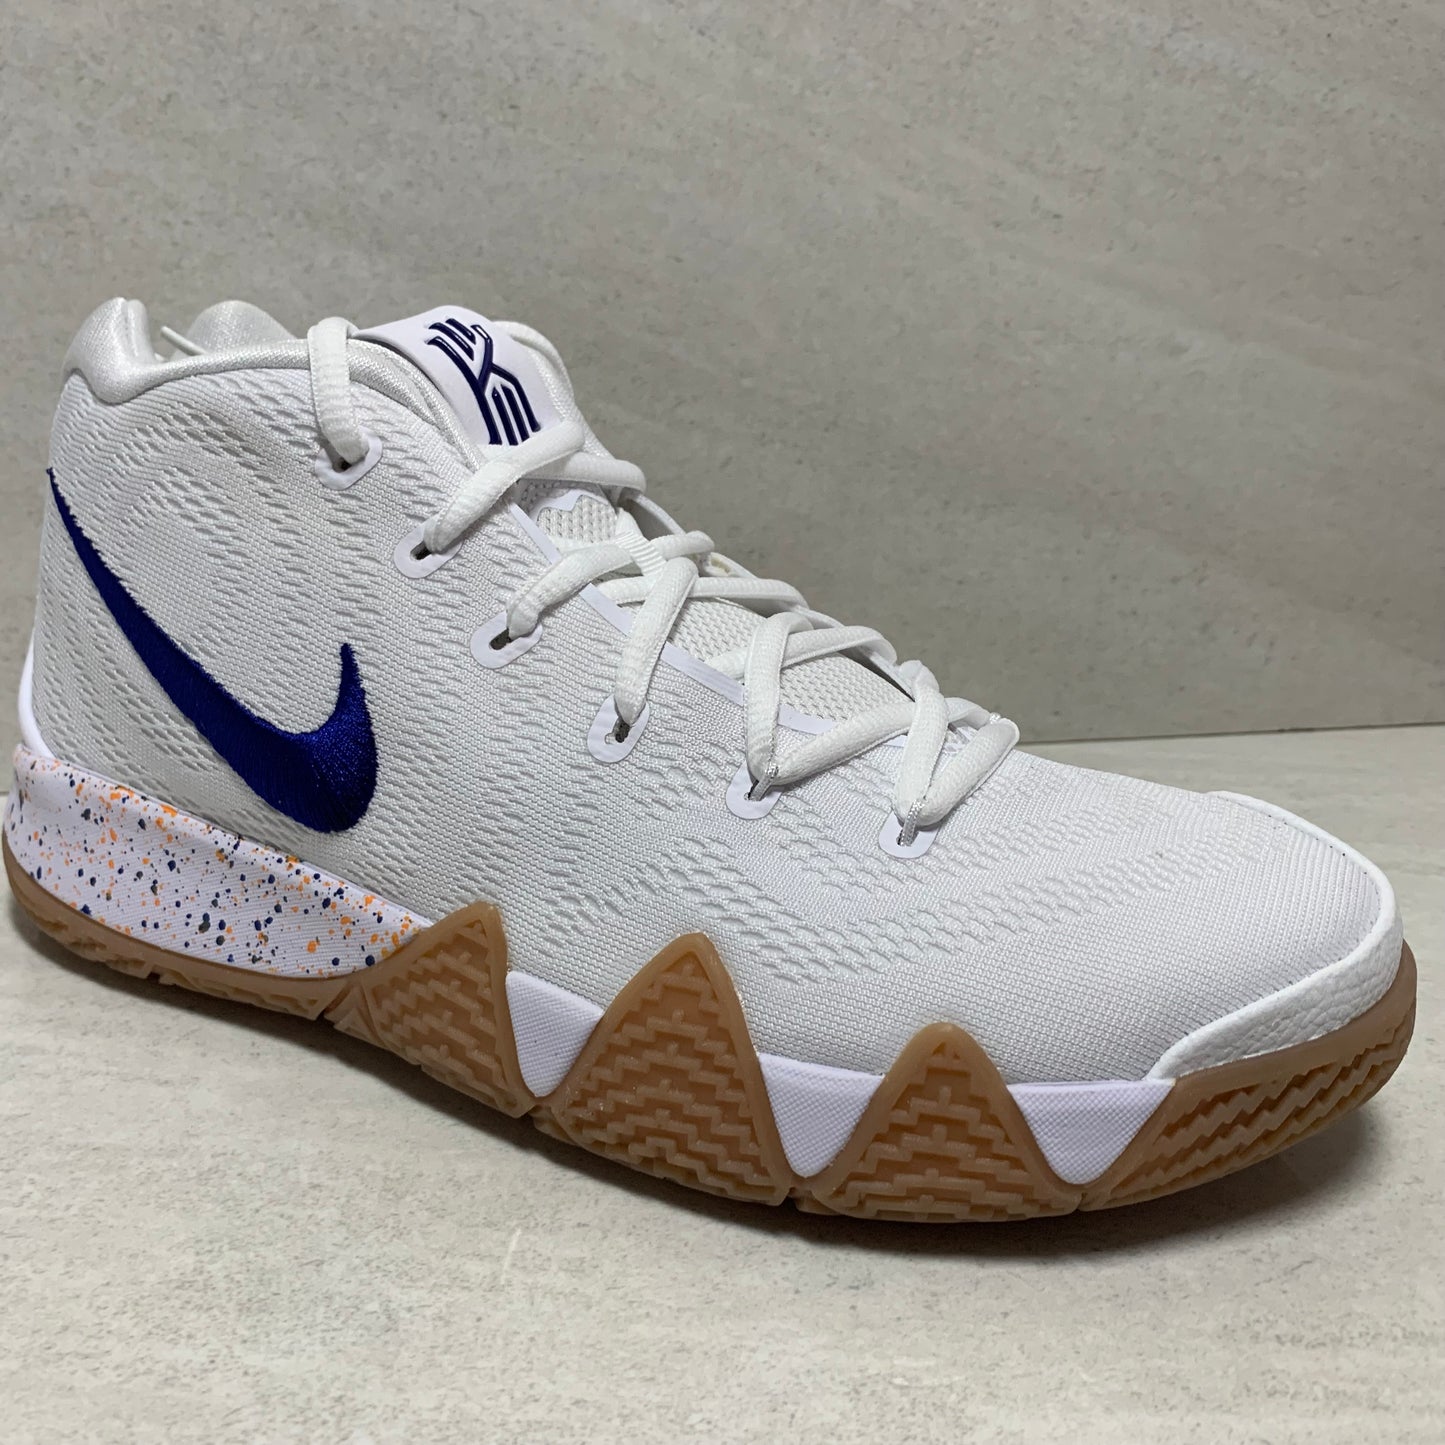 NIKE KYRIE 4 UNCLE DREW GS SIZE 5.5Y/7Y AA2897-100